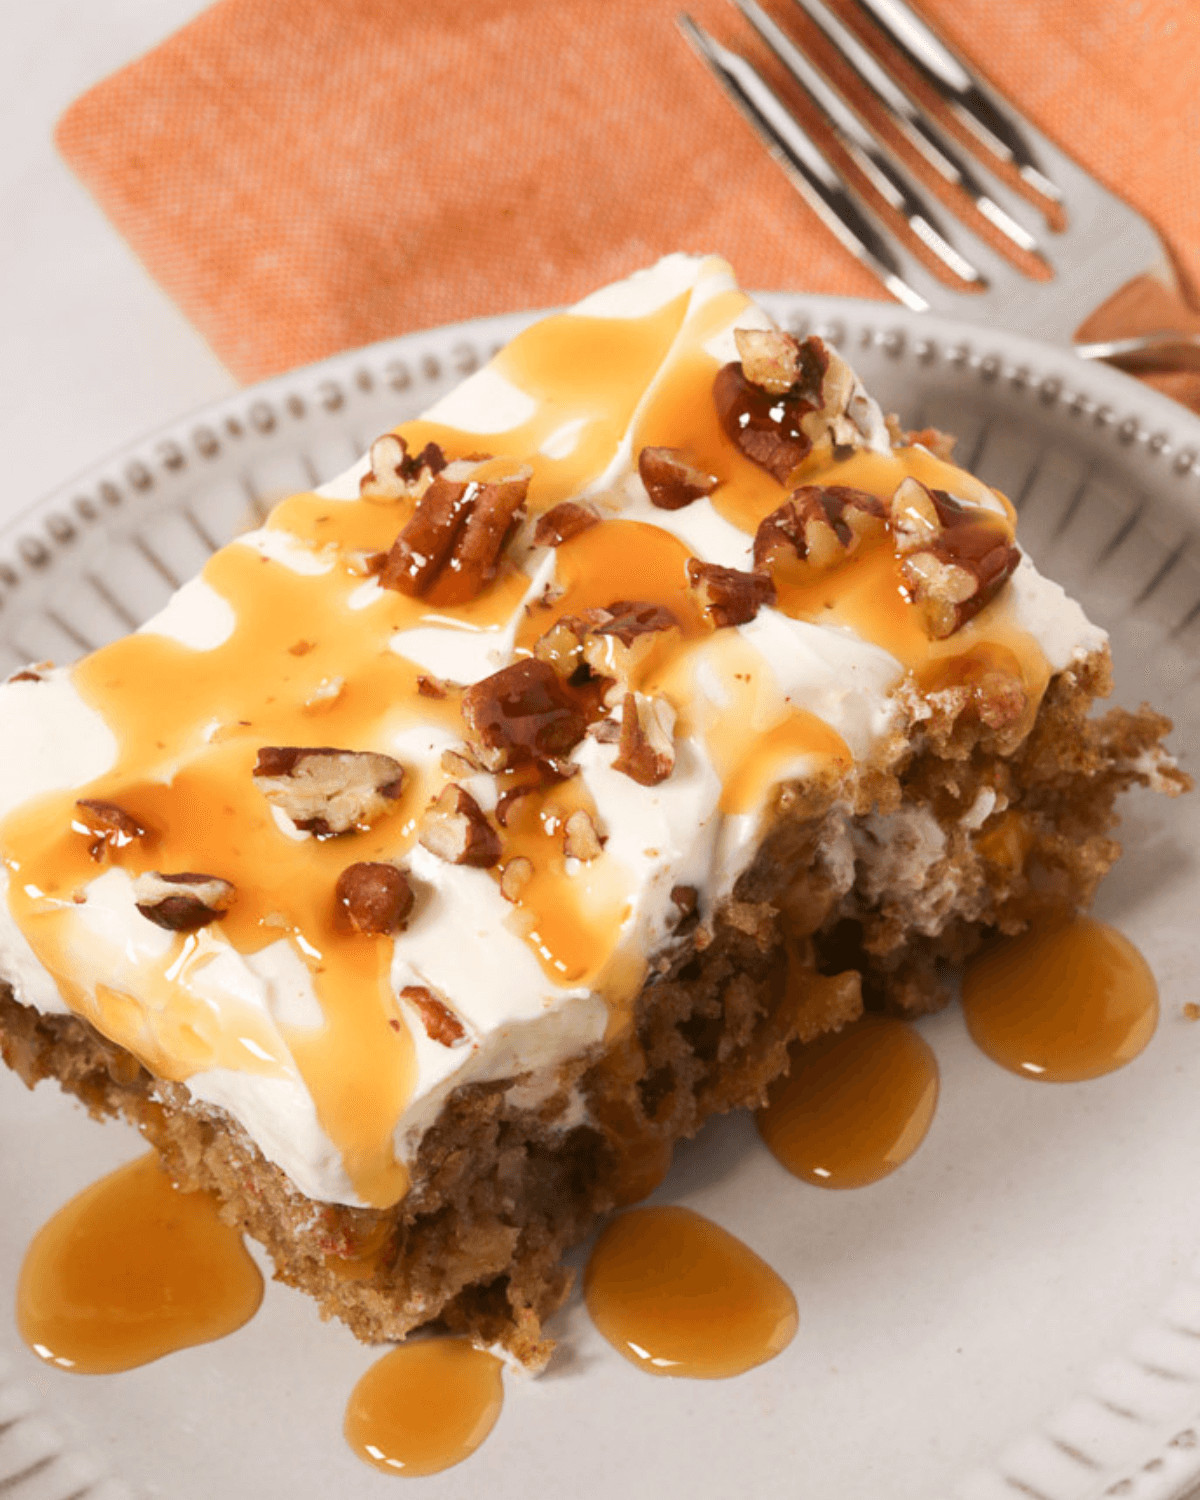 A piece of carrot poke cake topped with cream cheese frosting, caramel drizzle, and chopped pecans, served on a decorative plate.